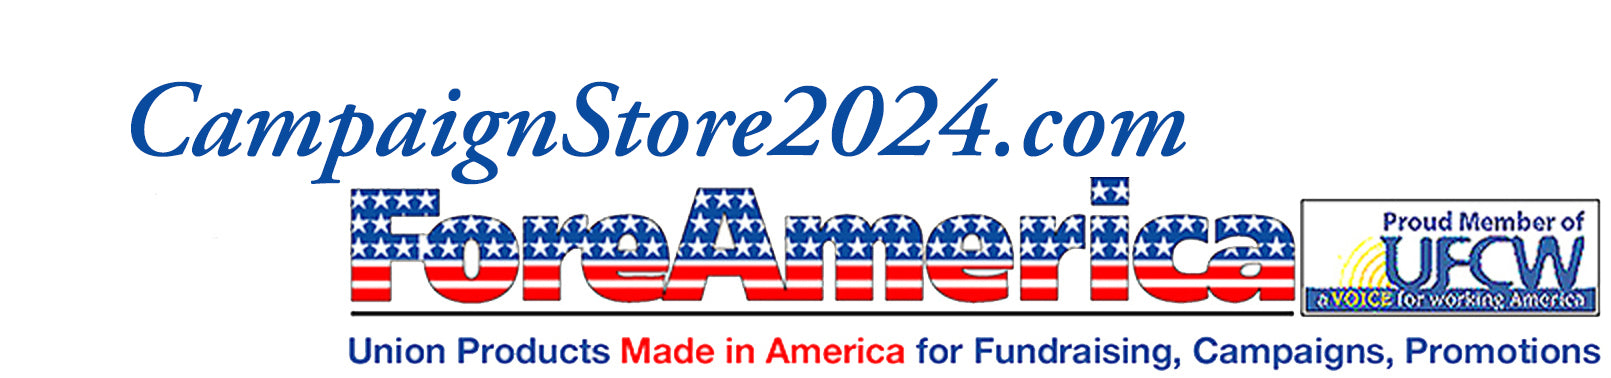 <h4><em><strong>The 2024 Elections Are On The Horizon; Ukraine, Gun Safety, Choice, and Voting Rights Are Still On Our Minds.... Let's Show People How We Think Government Can Work For All People.</strong></em></h4><h4><strong>Up To 50% Of Retail Purchases Support Democratic Groups & Other Causes <br/>If You Use Your Organization's Discount Code.</strong></h4><h4><strong>Free Shipping On All Orders!</strong></h4>